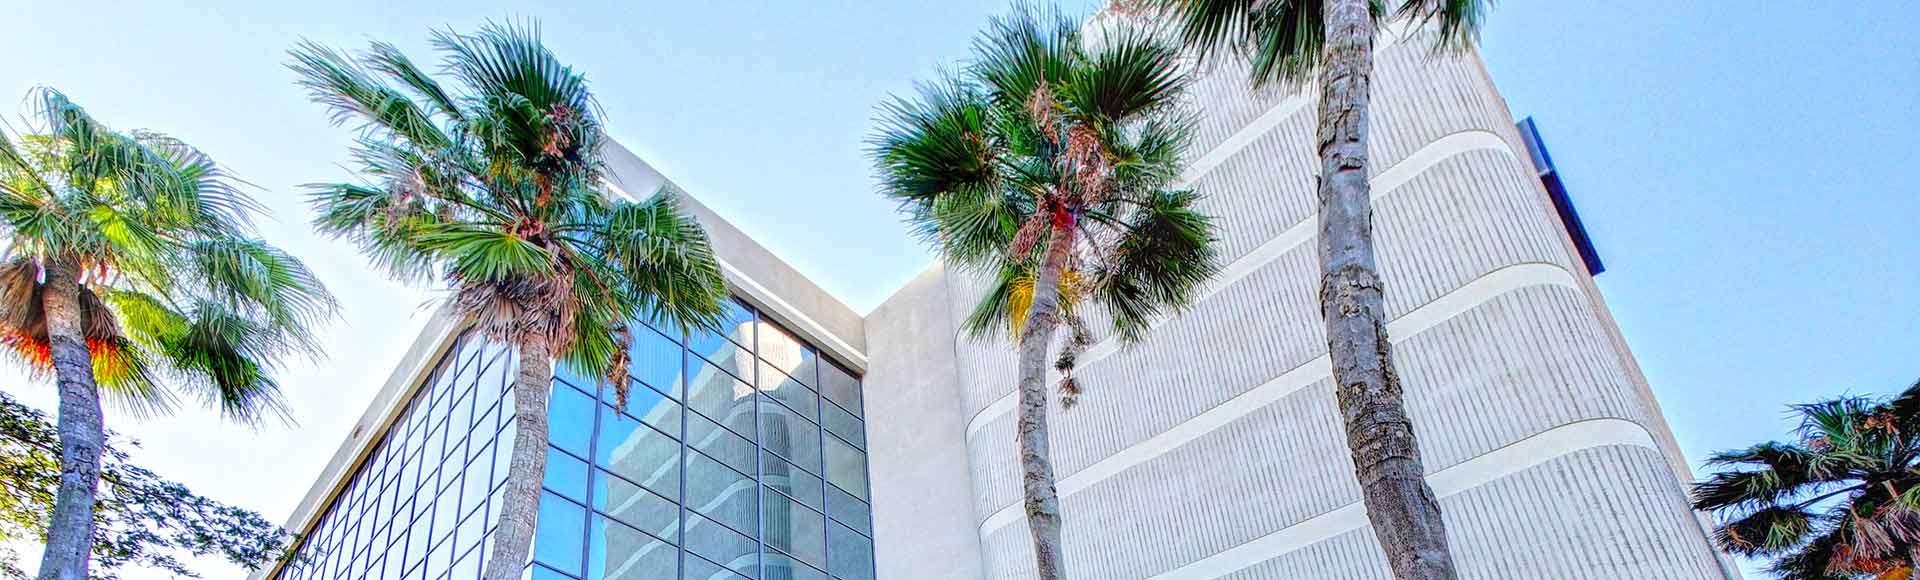 Palm Trees in front of Office Building